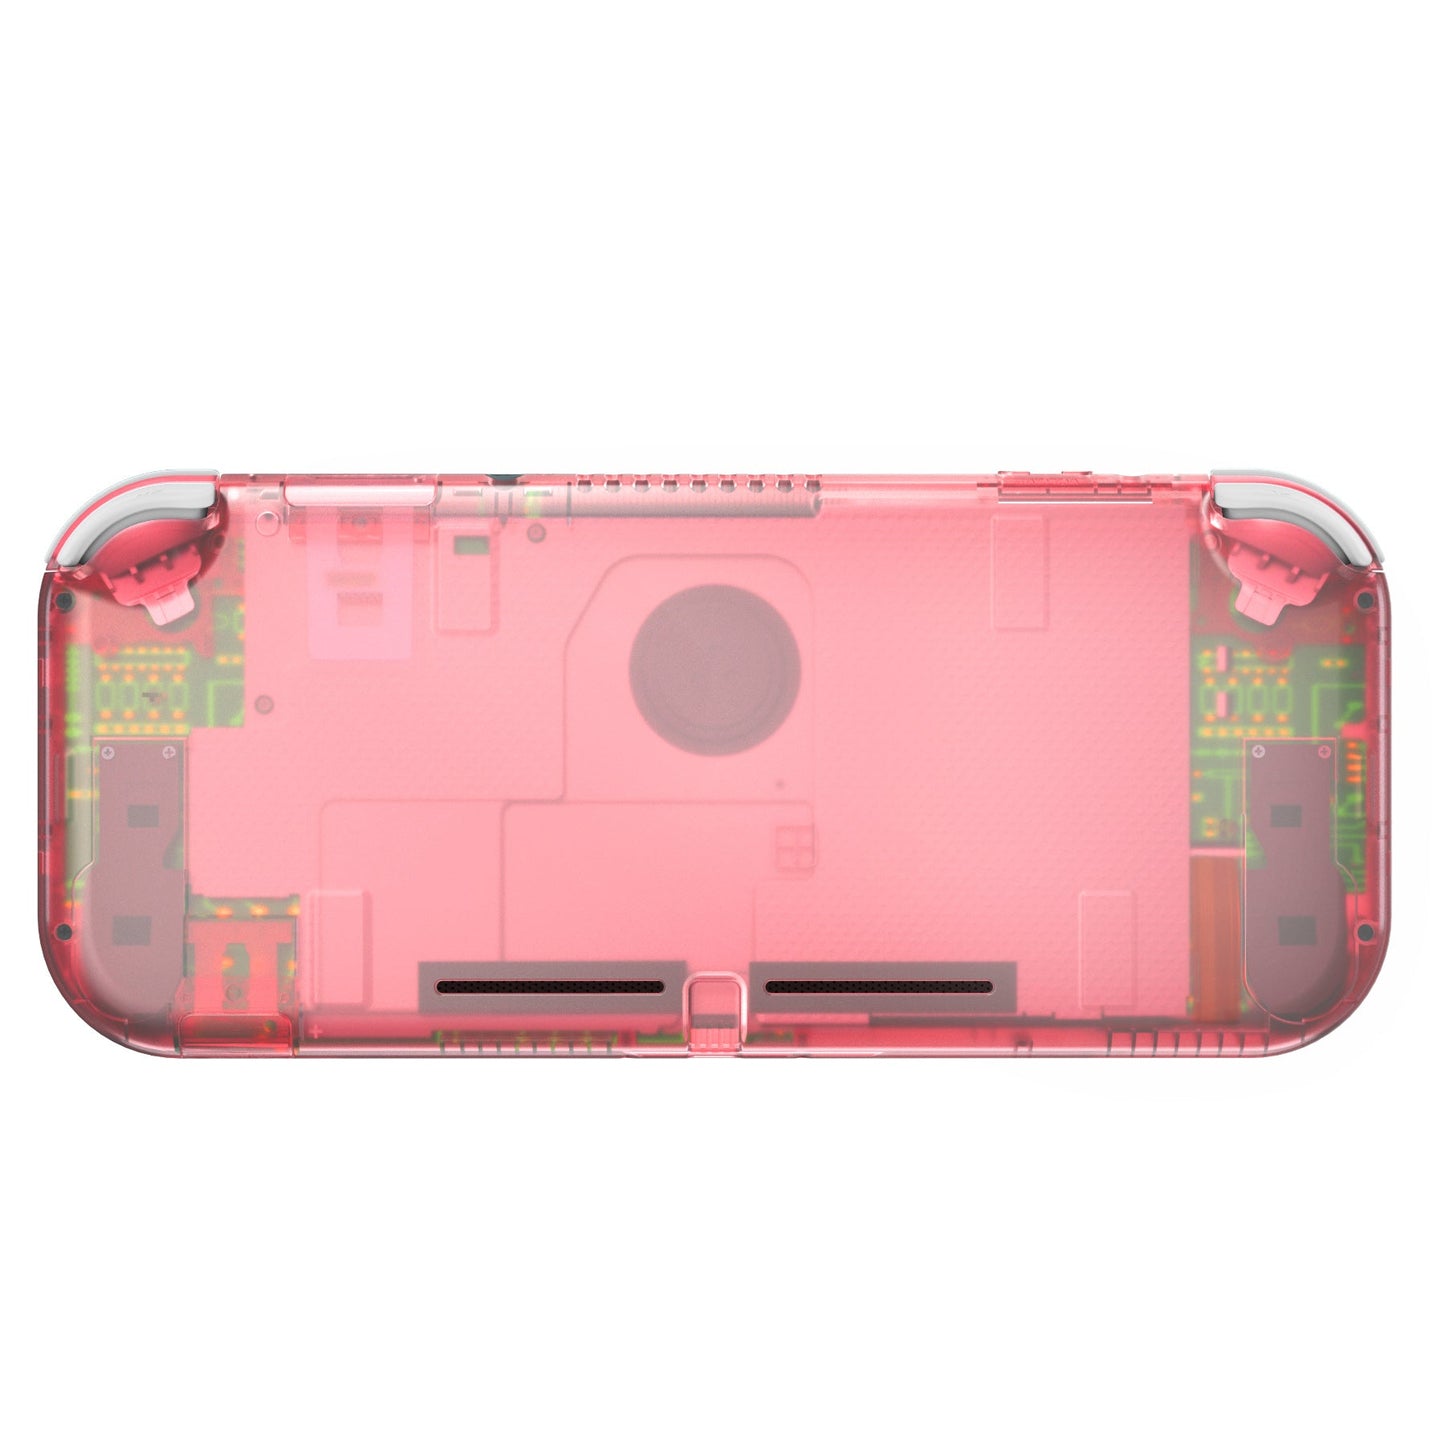 eXtremeRate Retail Cherry Pink DIY Replacement Shell for Nintendo Switch Lite, NSL Handheld Controller Housing with Screen Protector, Custom Case Cover for Nintendo Switch Lite - DLM507